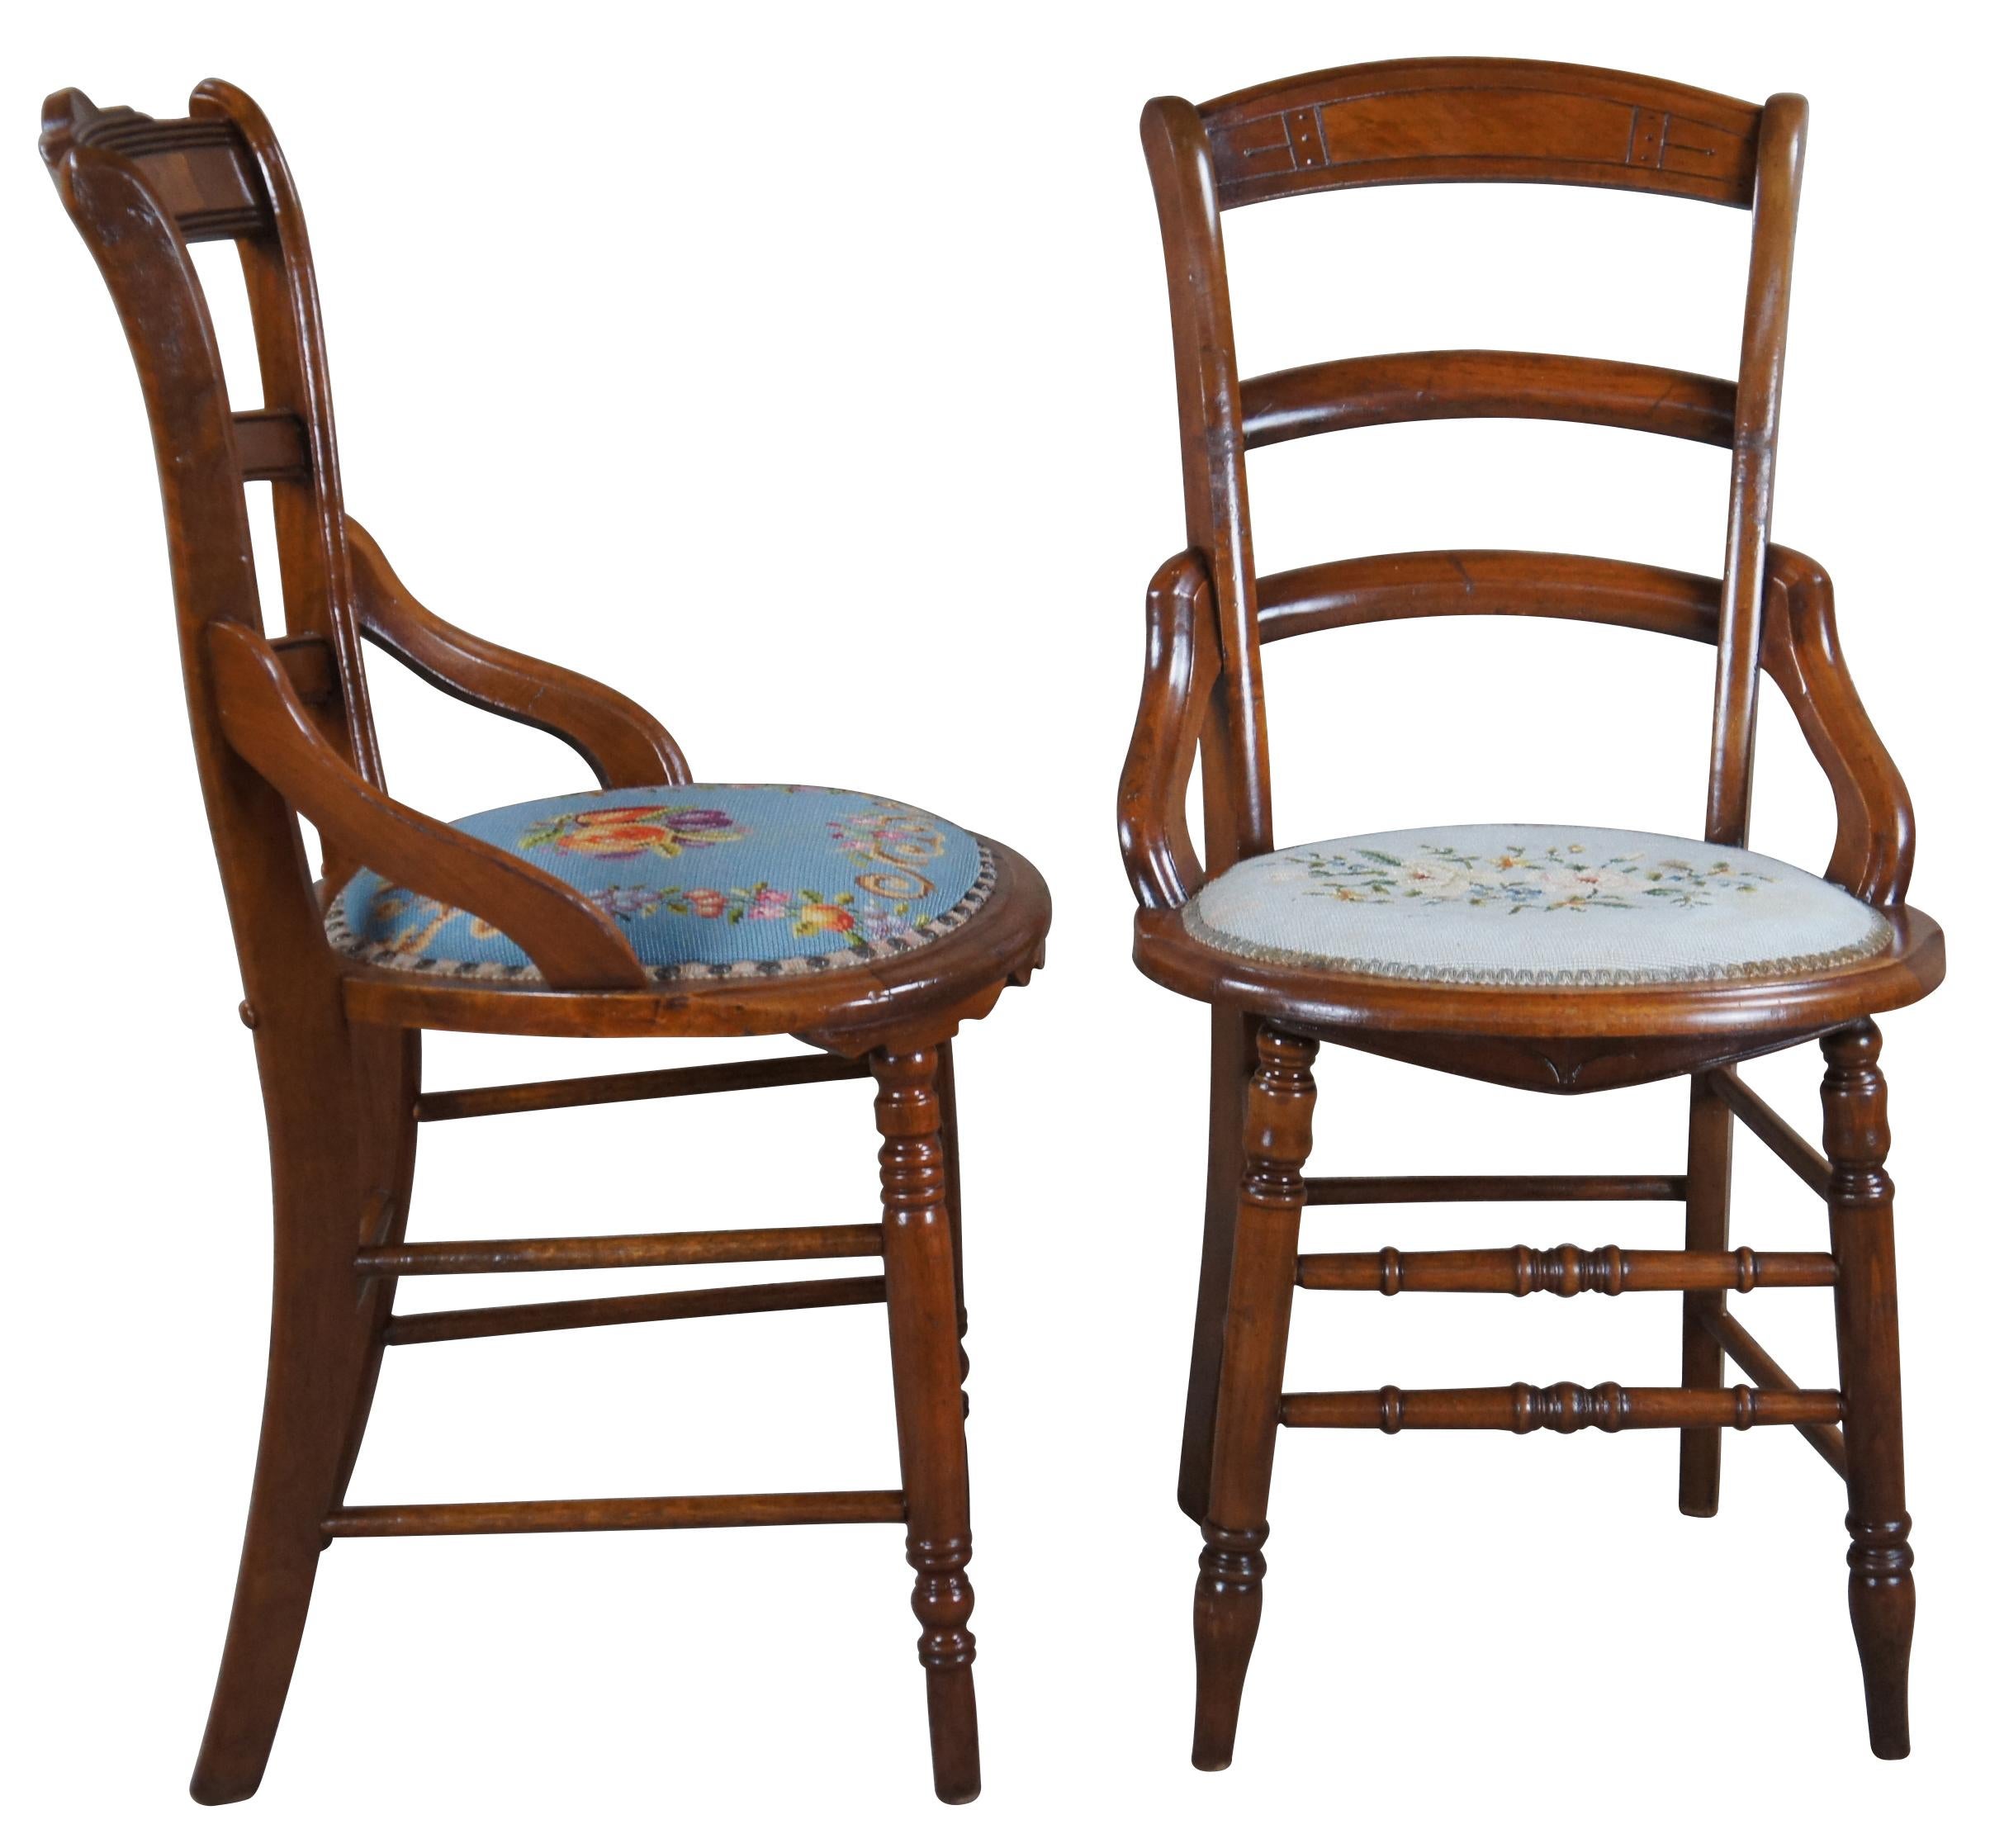 Two antique Victorian Eastlake parlor accent chairs. Made of walnut featuring turned posts, needlepoint seats, one with nail head accents, burl wood panel and cane.

Measures: 17.5